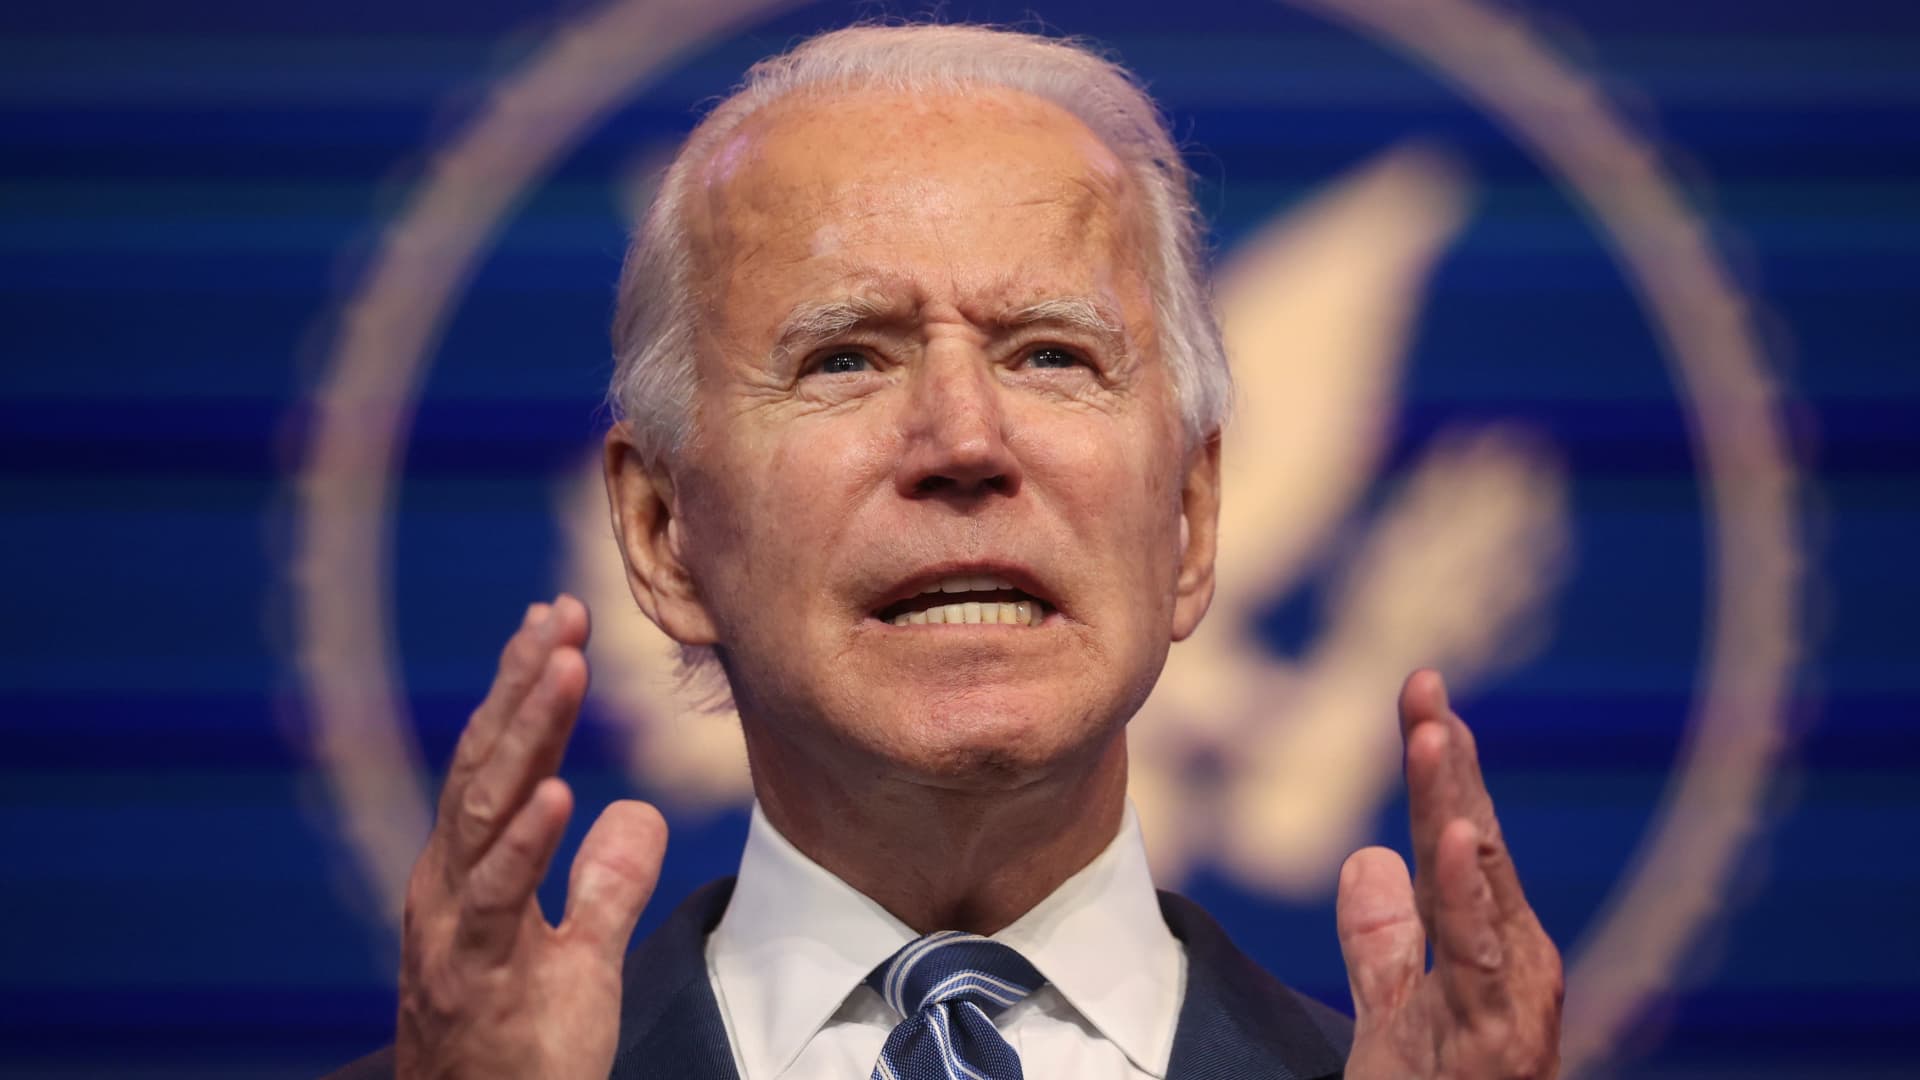 U.S. President-elect Joe Biden discusses the importance of protecting the Affordable Care Act (ACA) as he speaks to reporters about his health care plan during a news conference in Wilmington, Delaware, U.S., November 10, 2020.